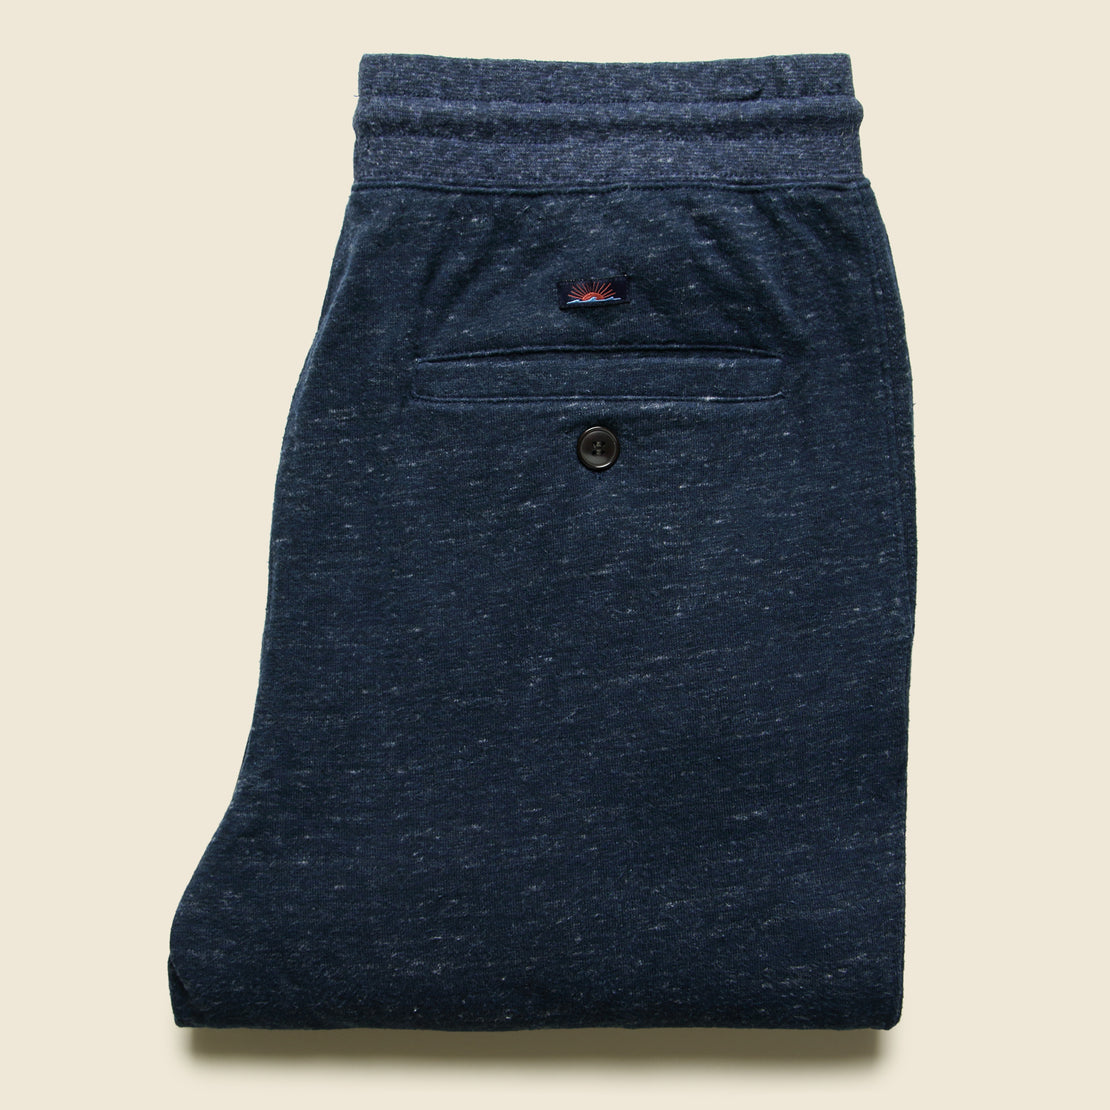 Dual Knit Sweatpant - Navy - Faherty - STAG Provisions - Pants - Lounge